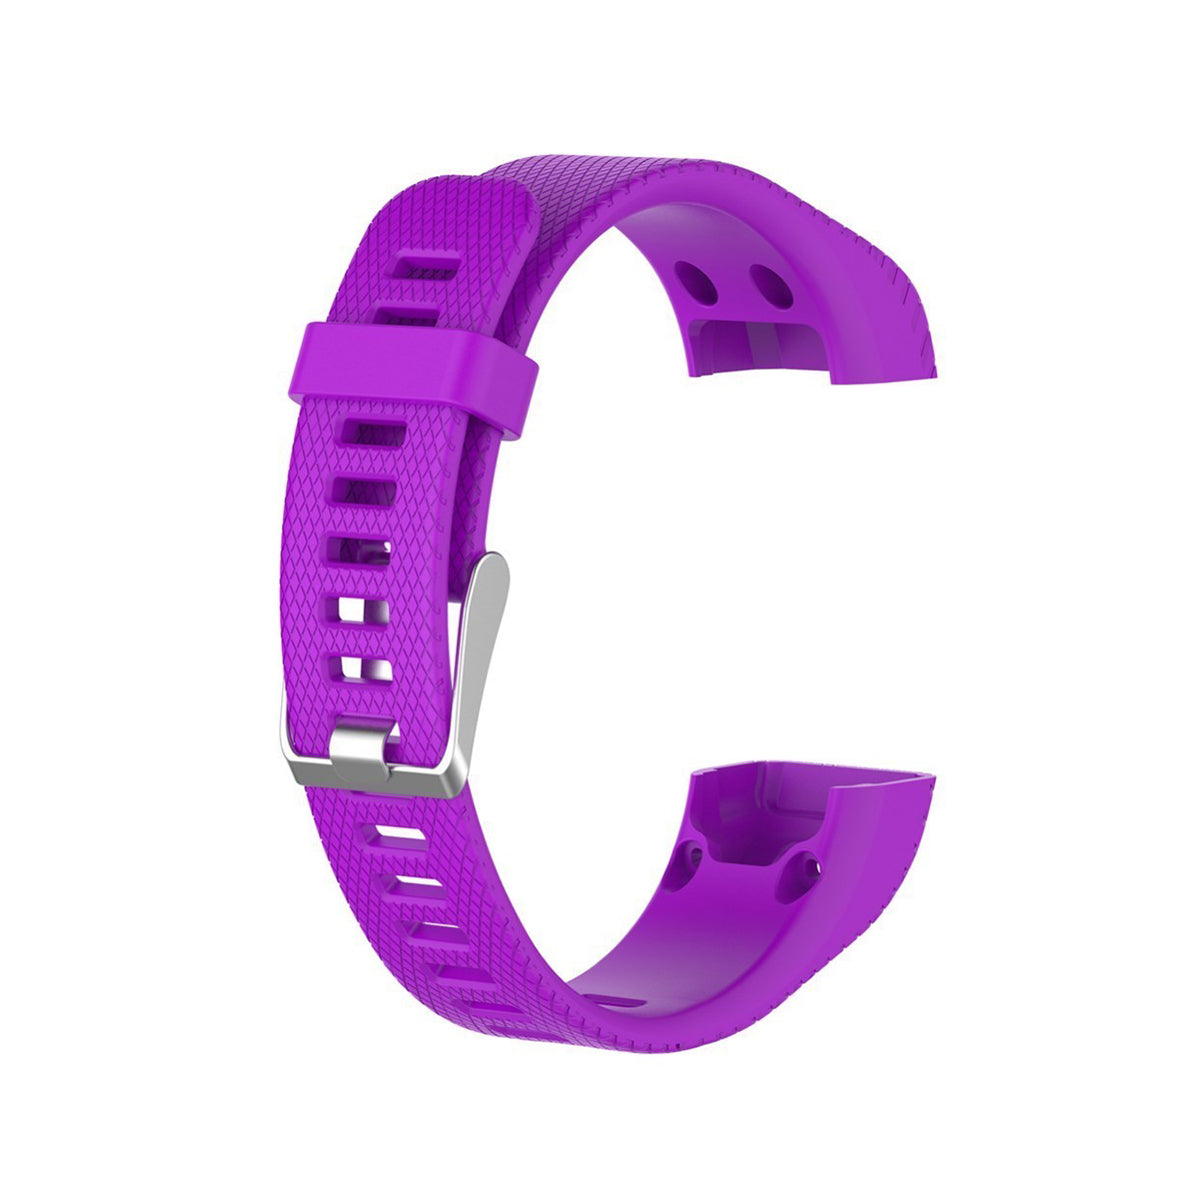 Garmin Approach X40 Replacement Bands Strap Kit with Tools Purple  